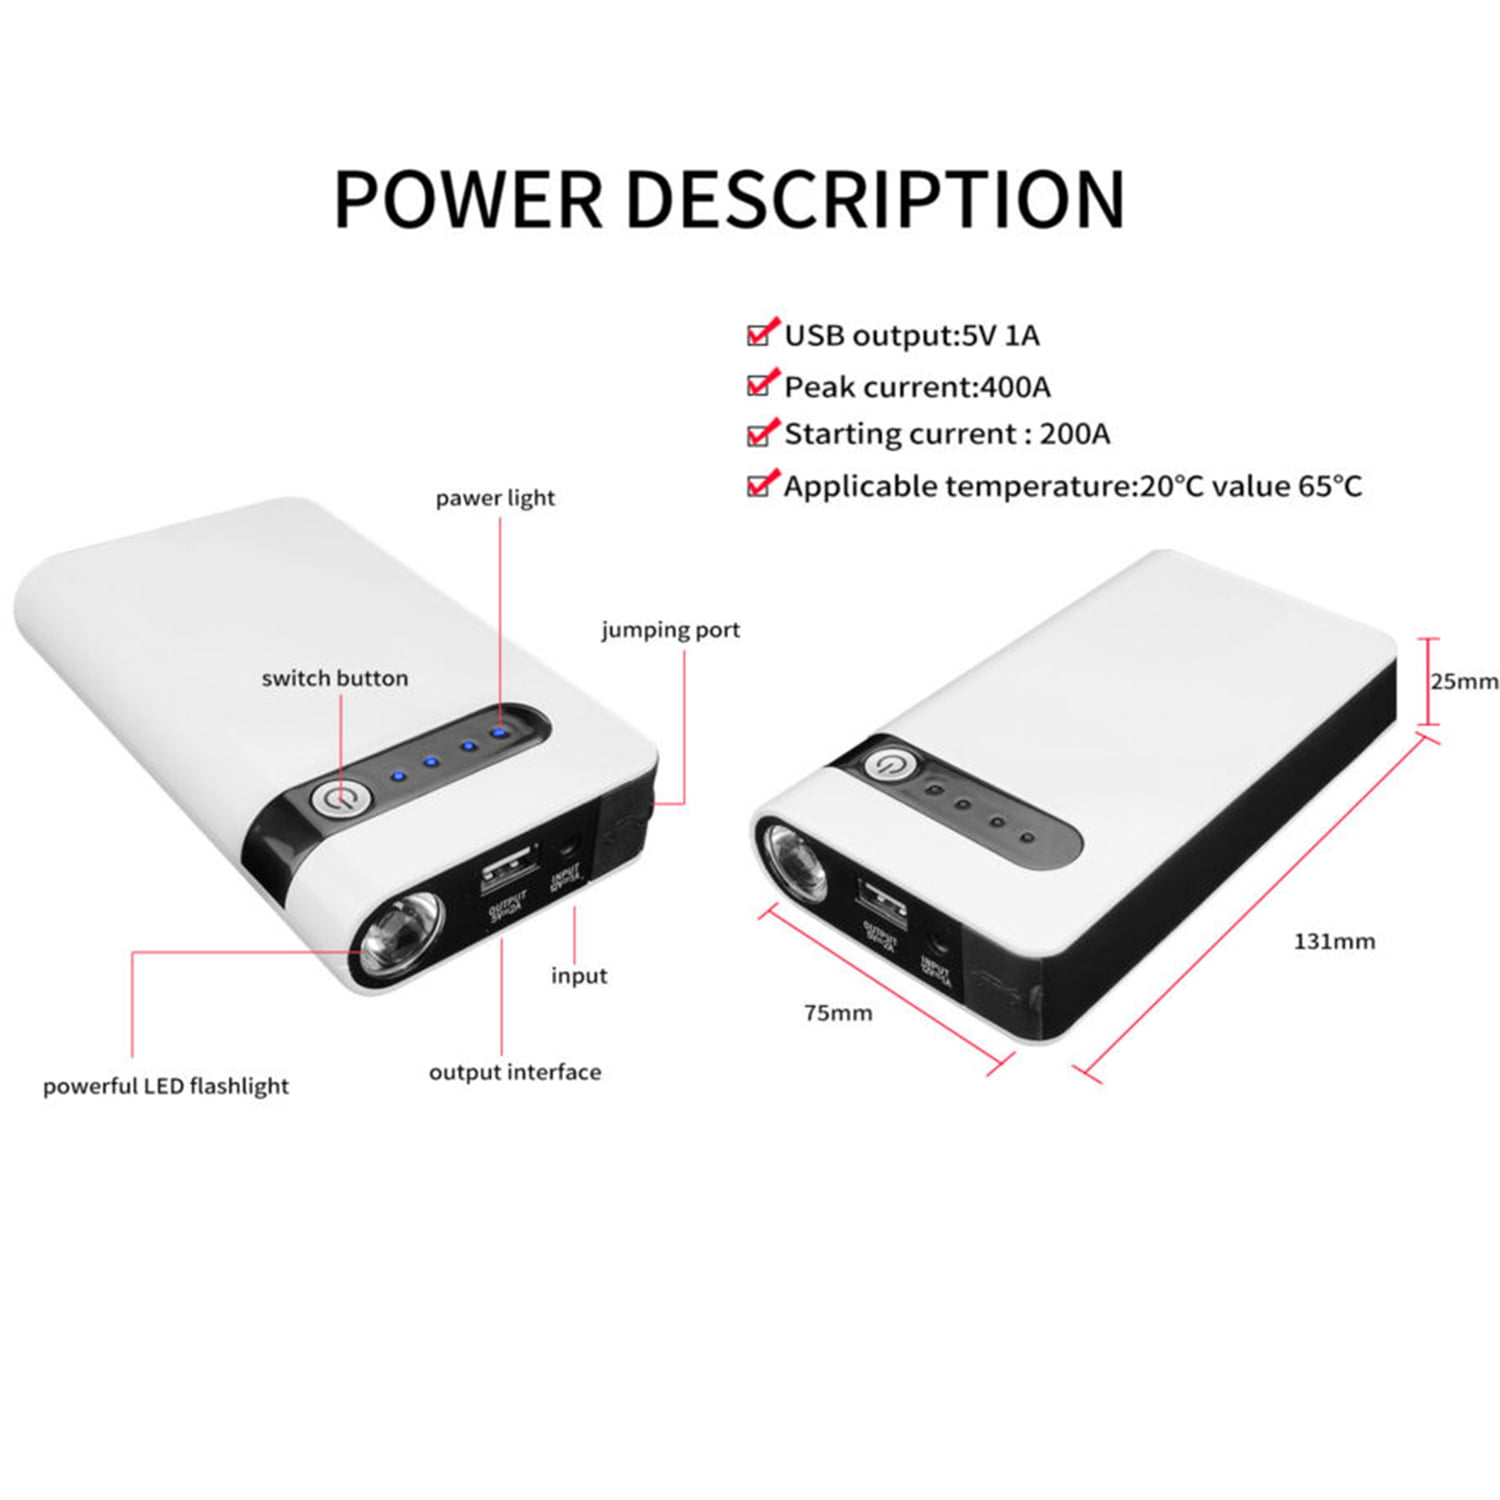 Xhy 69800mAh Car Jump Starter Portable Battery Pack Booster Jumper Box Emergency  Start Power Bank Supply Charger with Built-in LED Light 